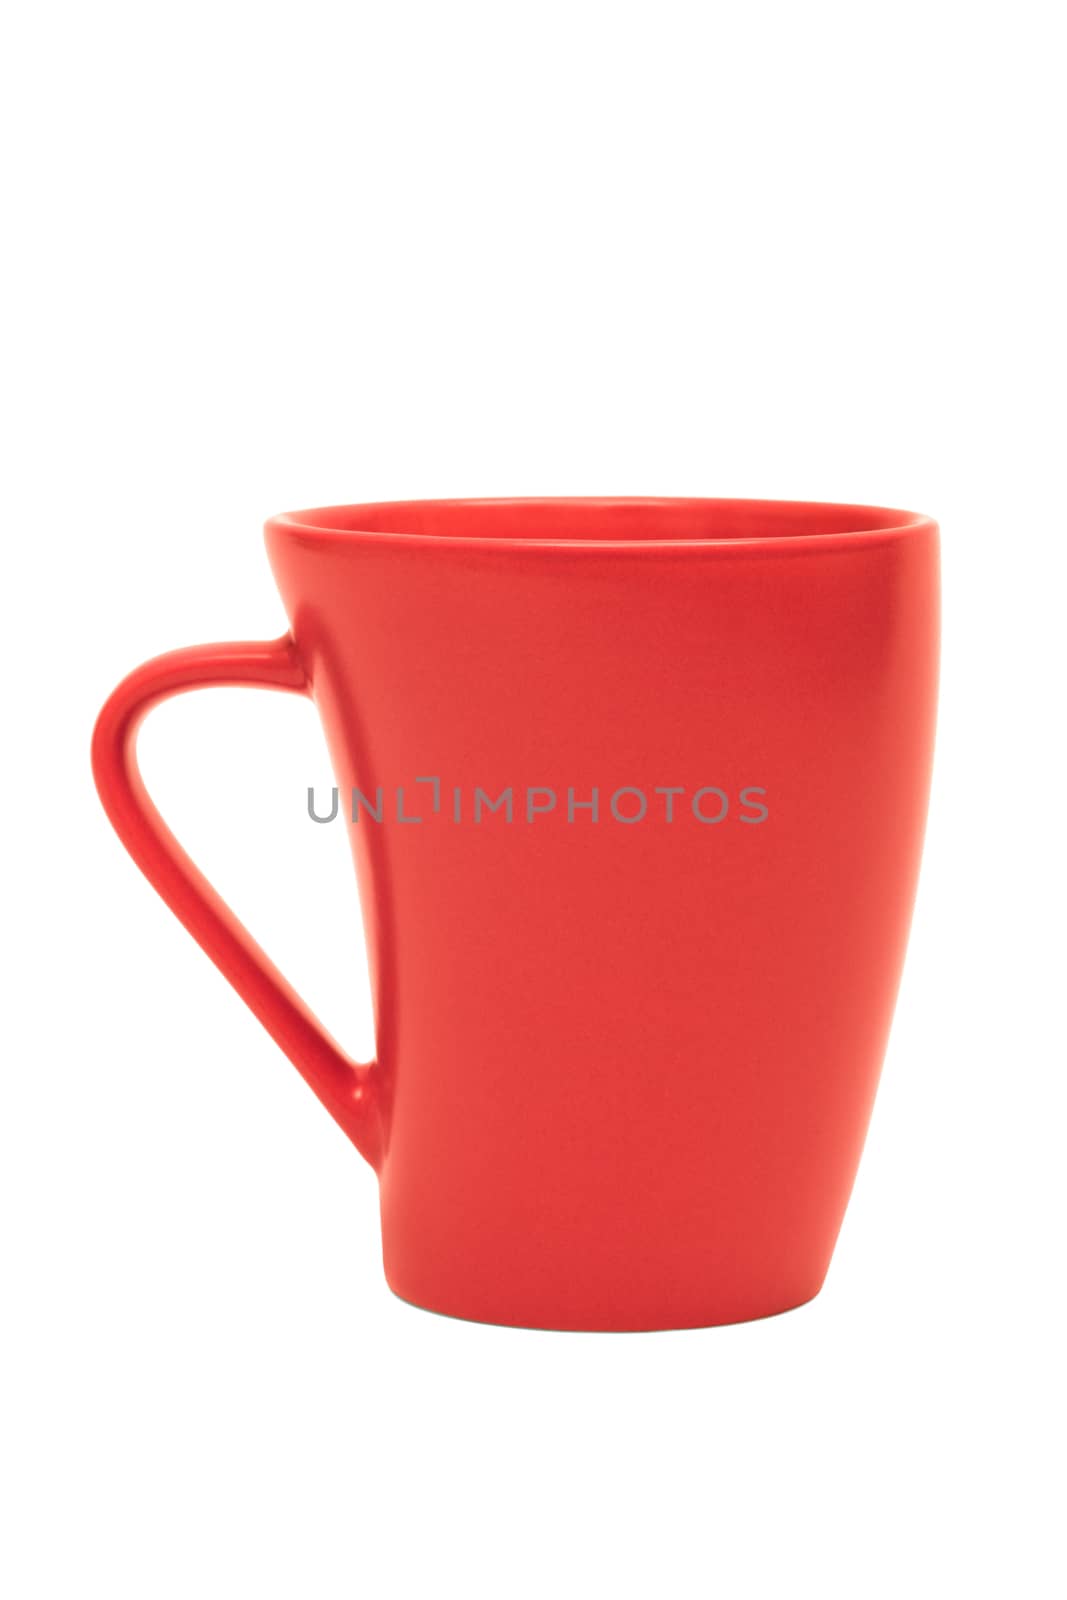 new red mug on a white background